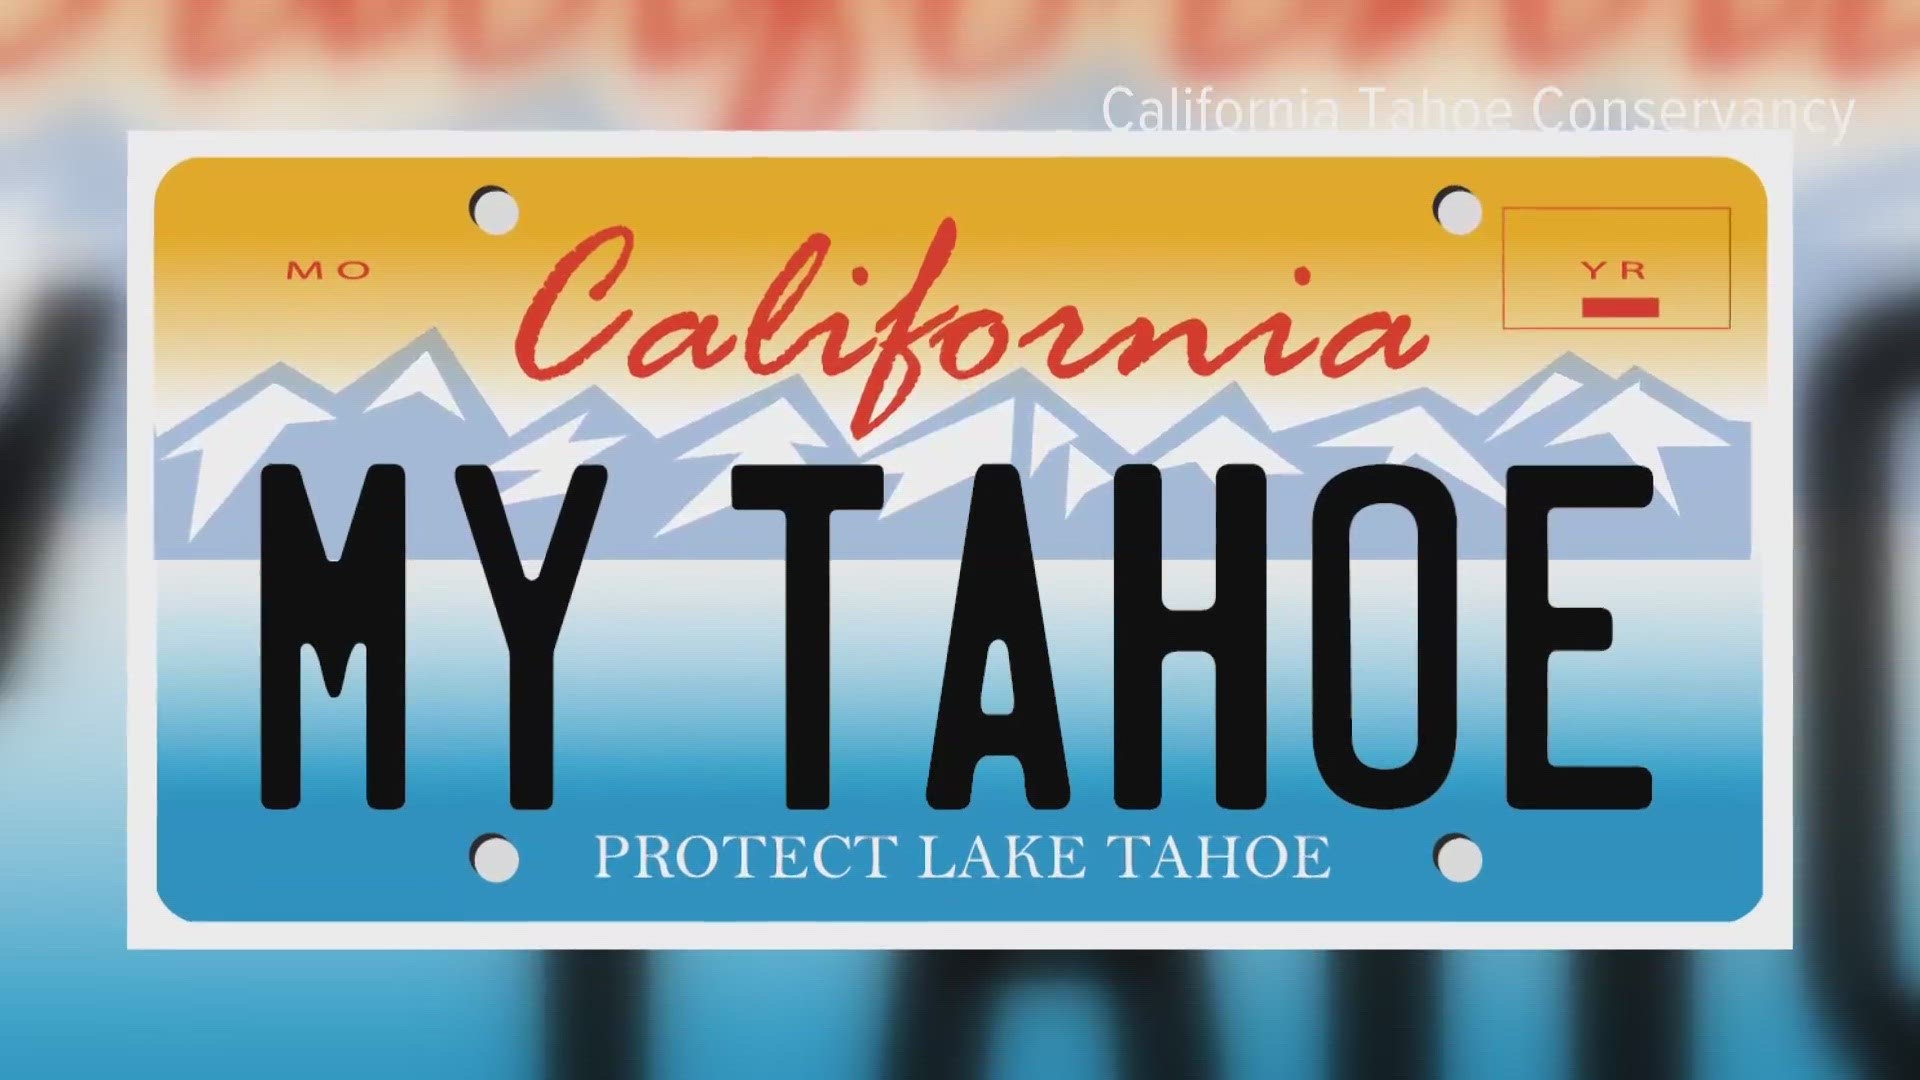 New purchasers of a Lake Tahoe license plate can ski or ride for free as part of the Plates for Powder campaign.